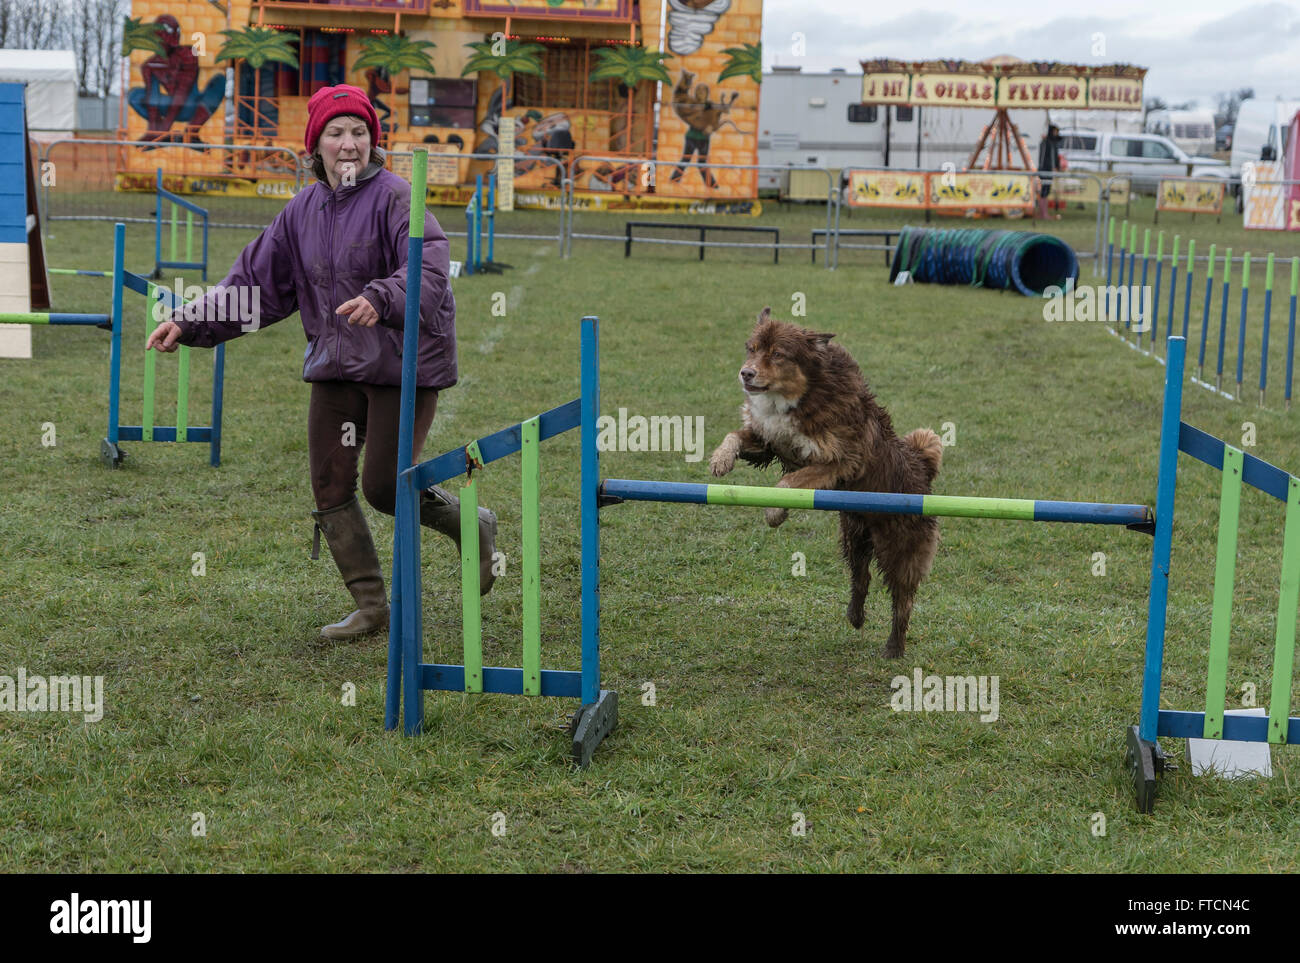 The Living Heritage Country show.People bring their dogs to the agility dog trials. Credit:  Scott Carruthers/Alamy Live News Stock Photo